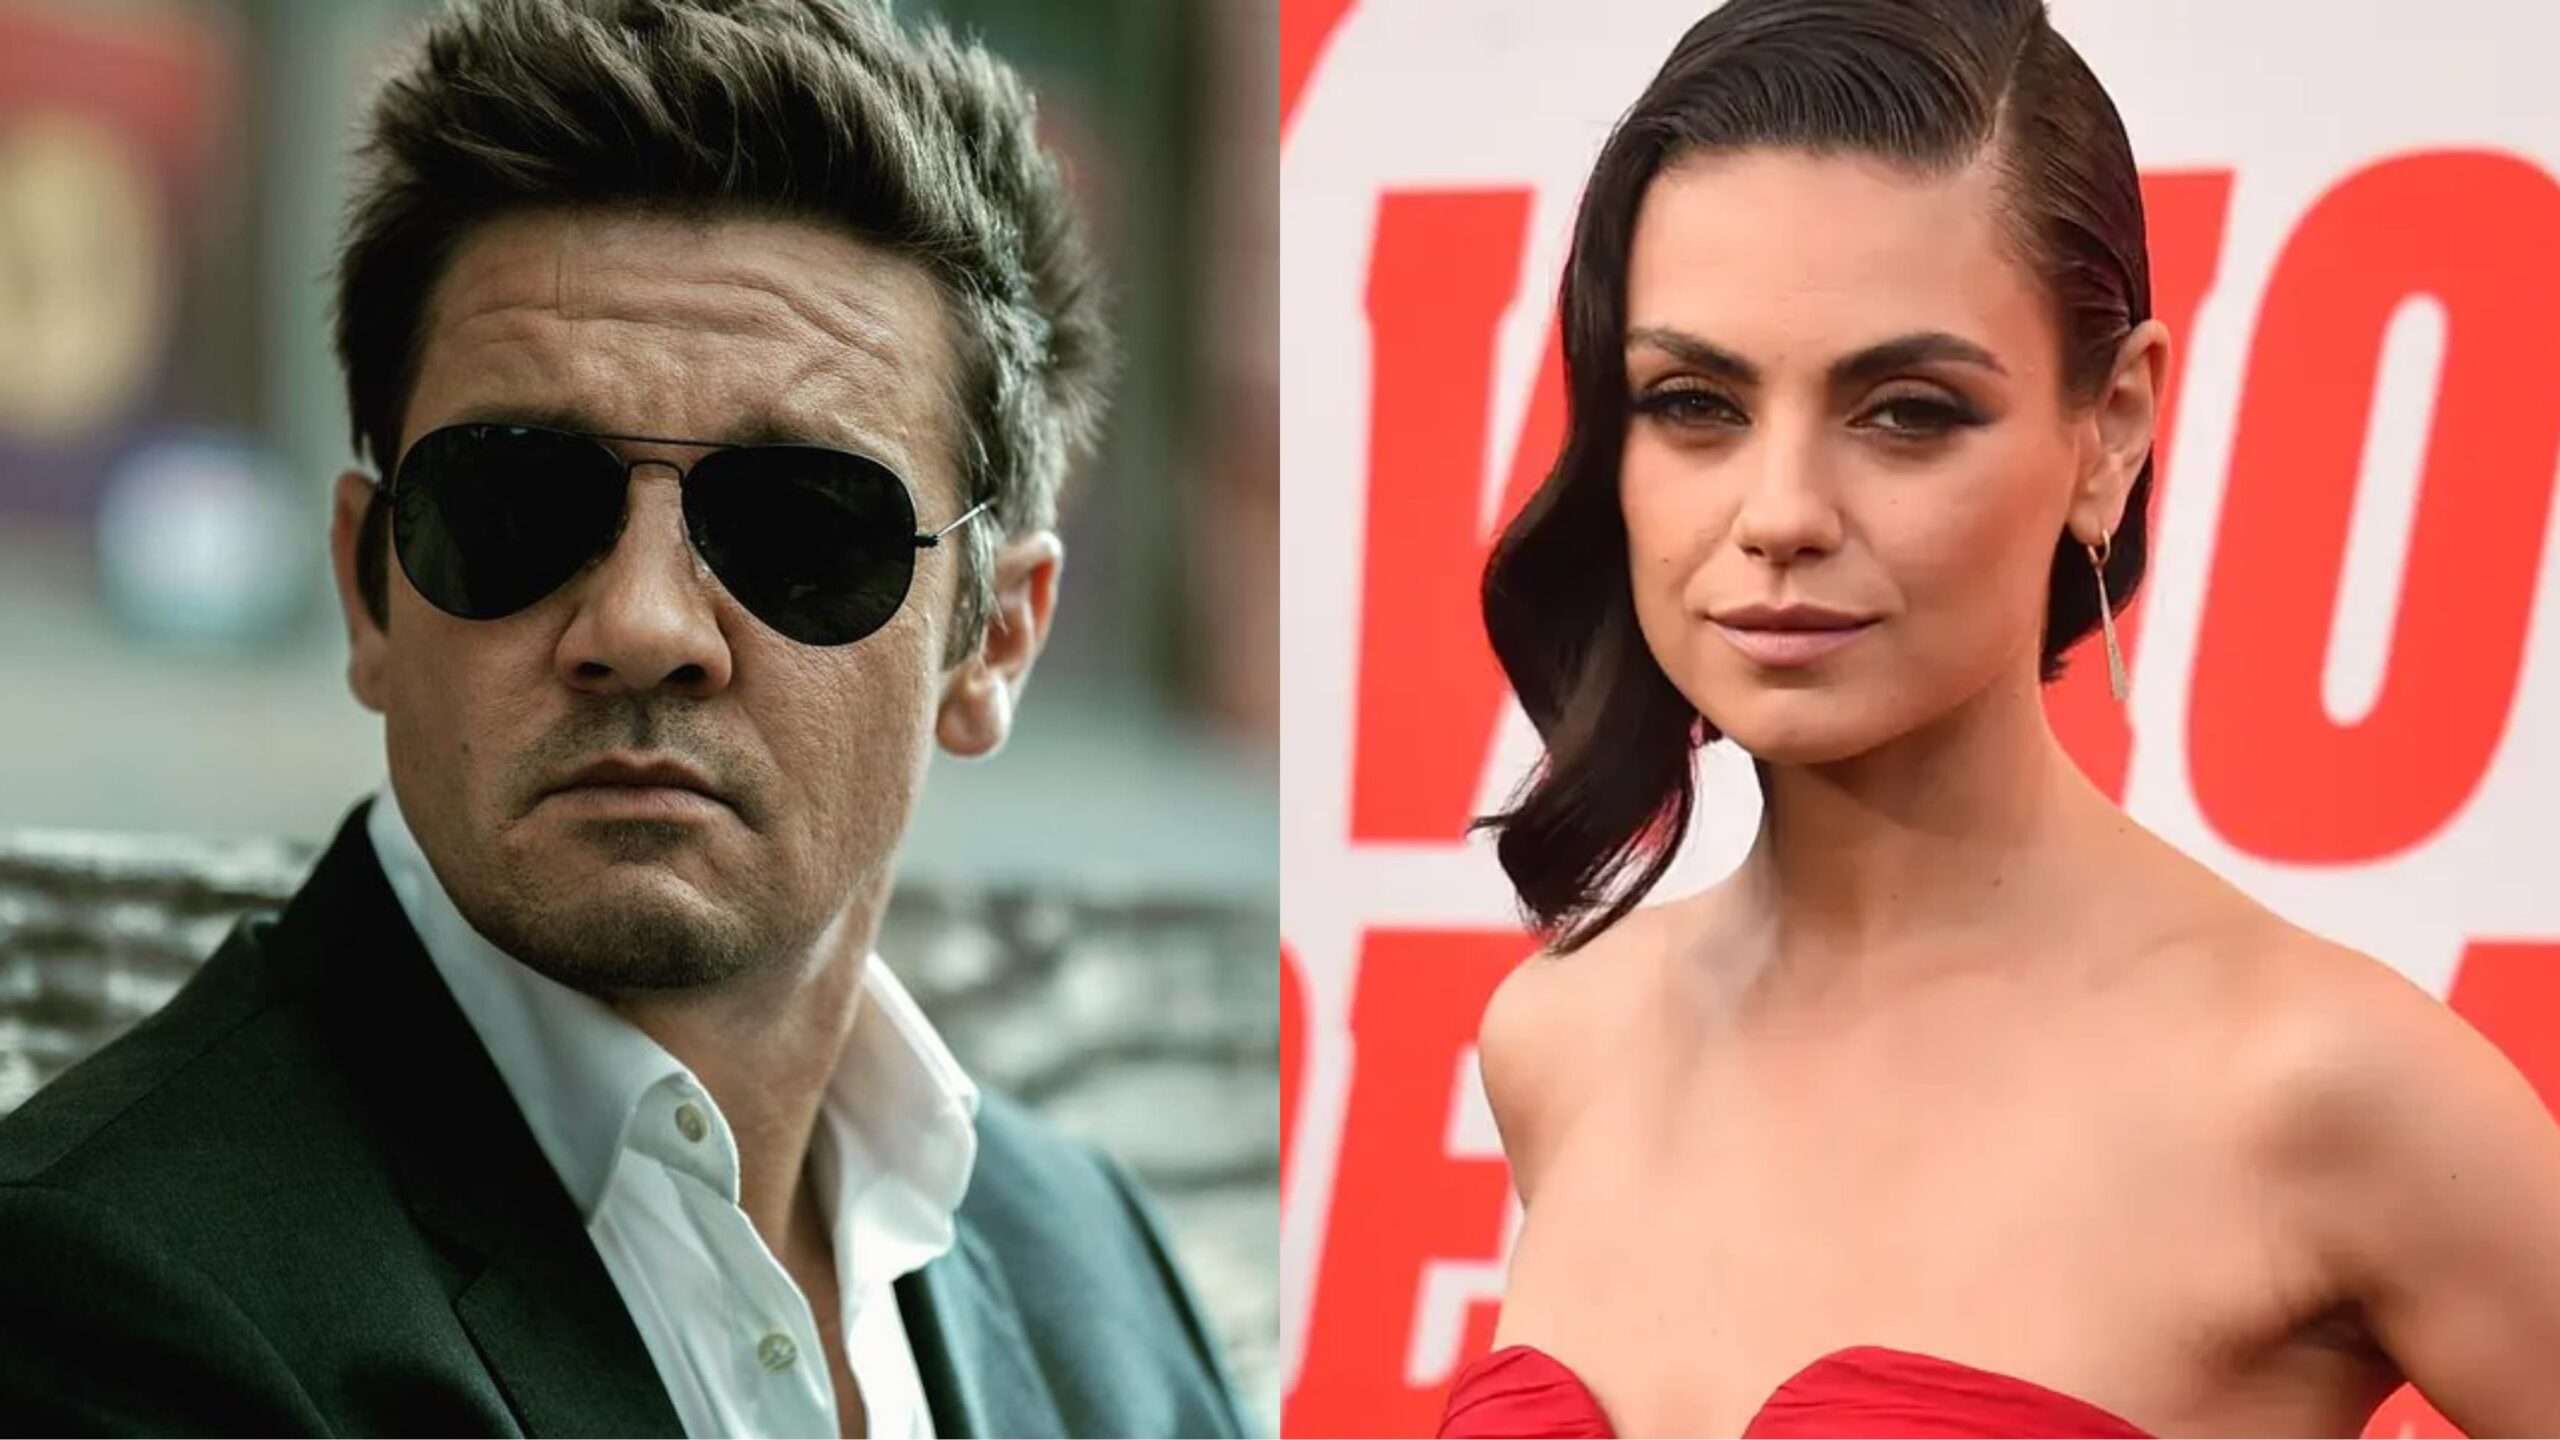 Mila Kunis and Jeremy Renner to star in Wake Up Dead Man: A Knives Out Mystery